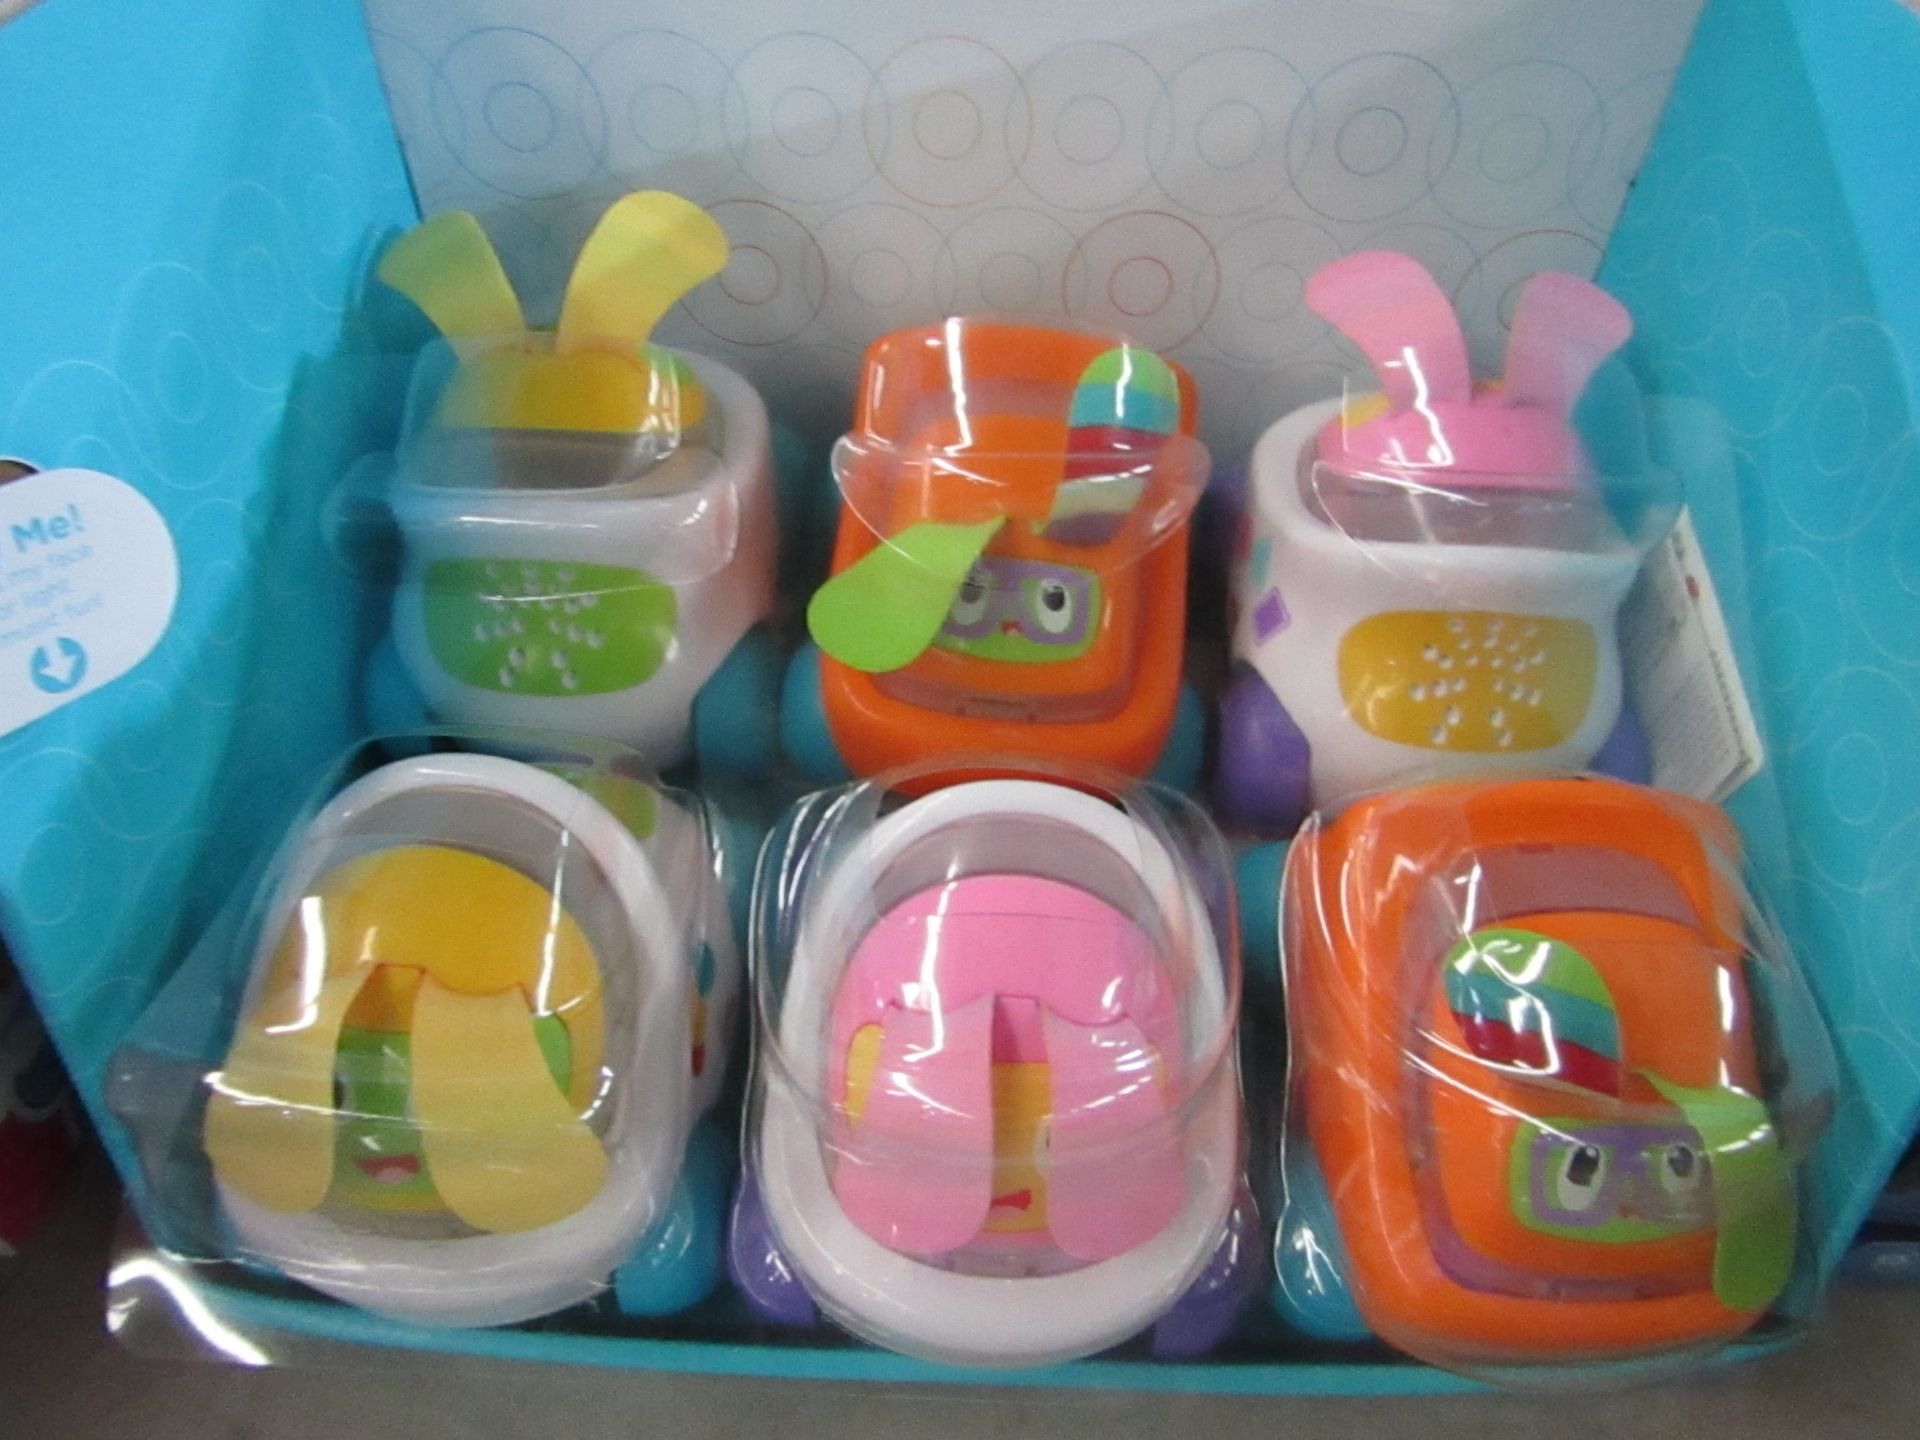 6x Fisher-Price - Bright Beat Buggies - Unused & Packaged.